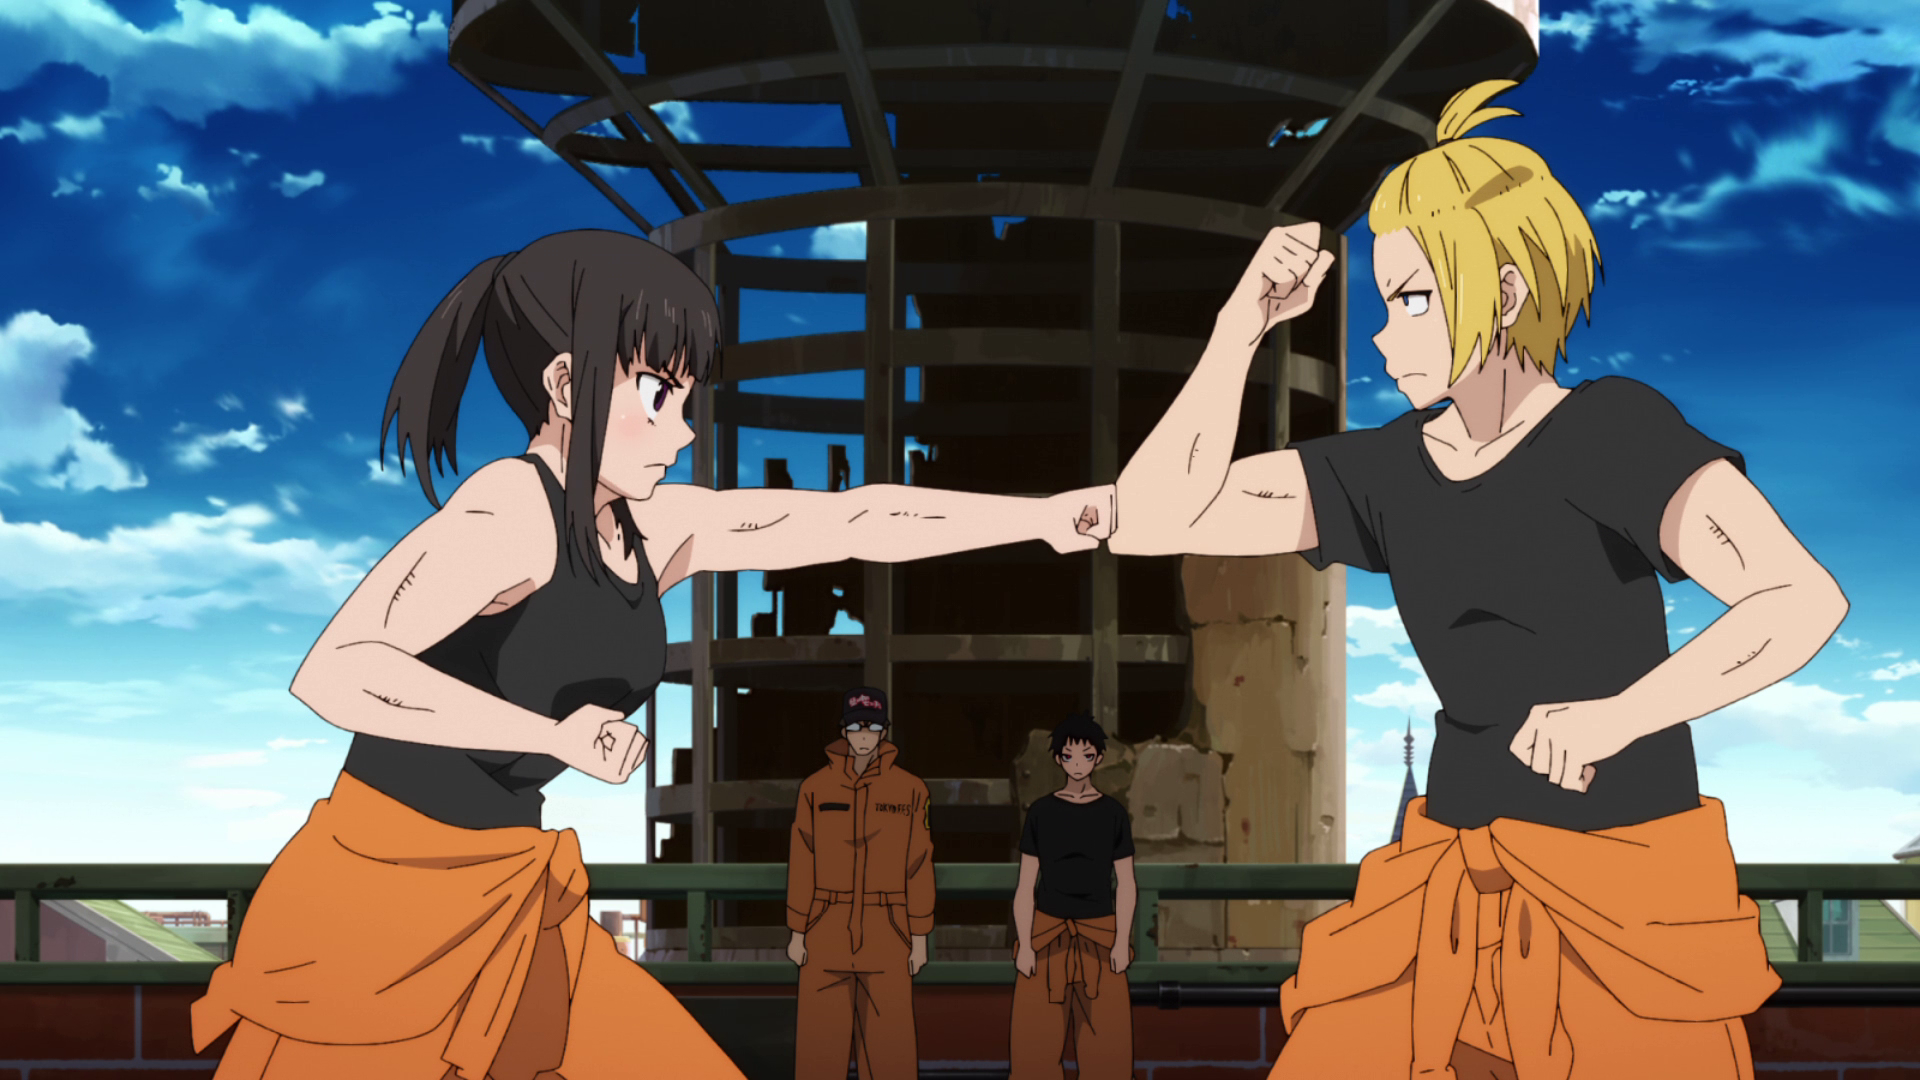 Fire Force Season 2 Episode 5 Anime Review and Discussion